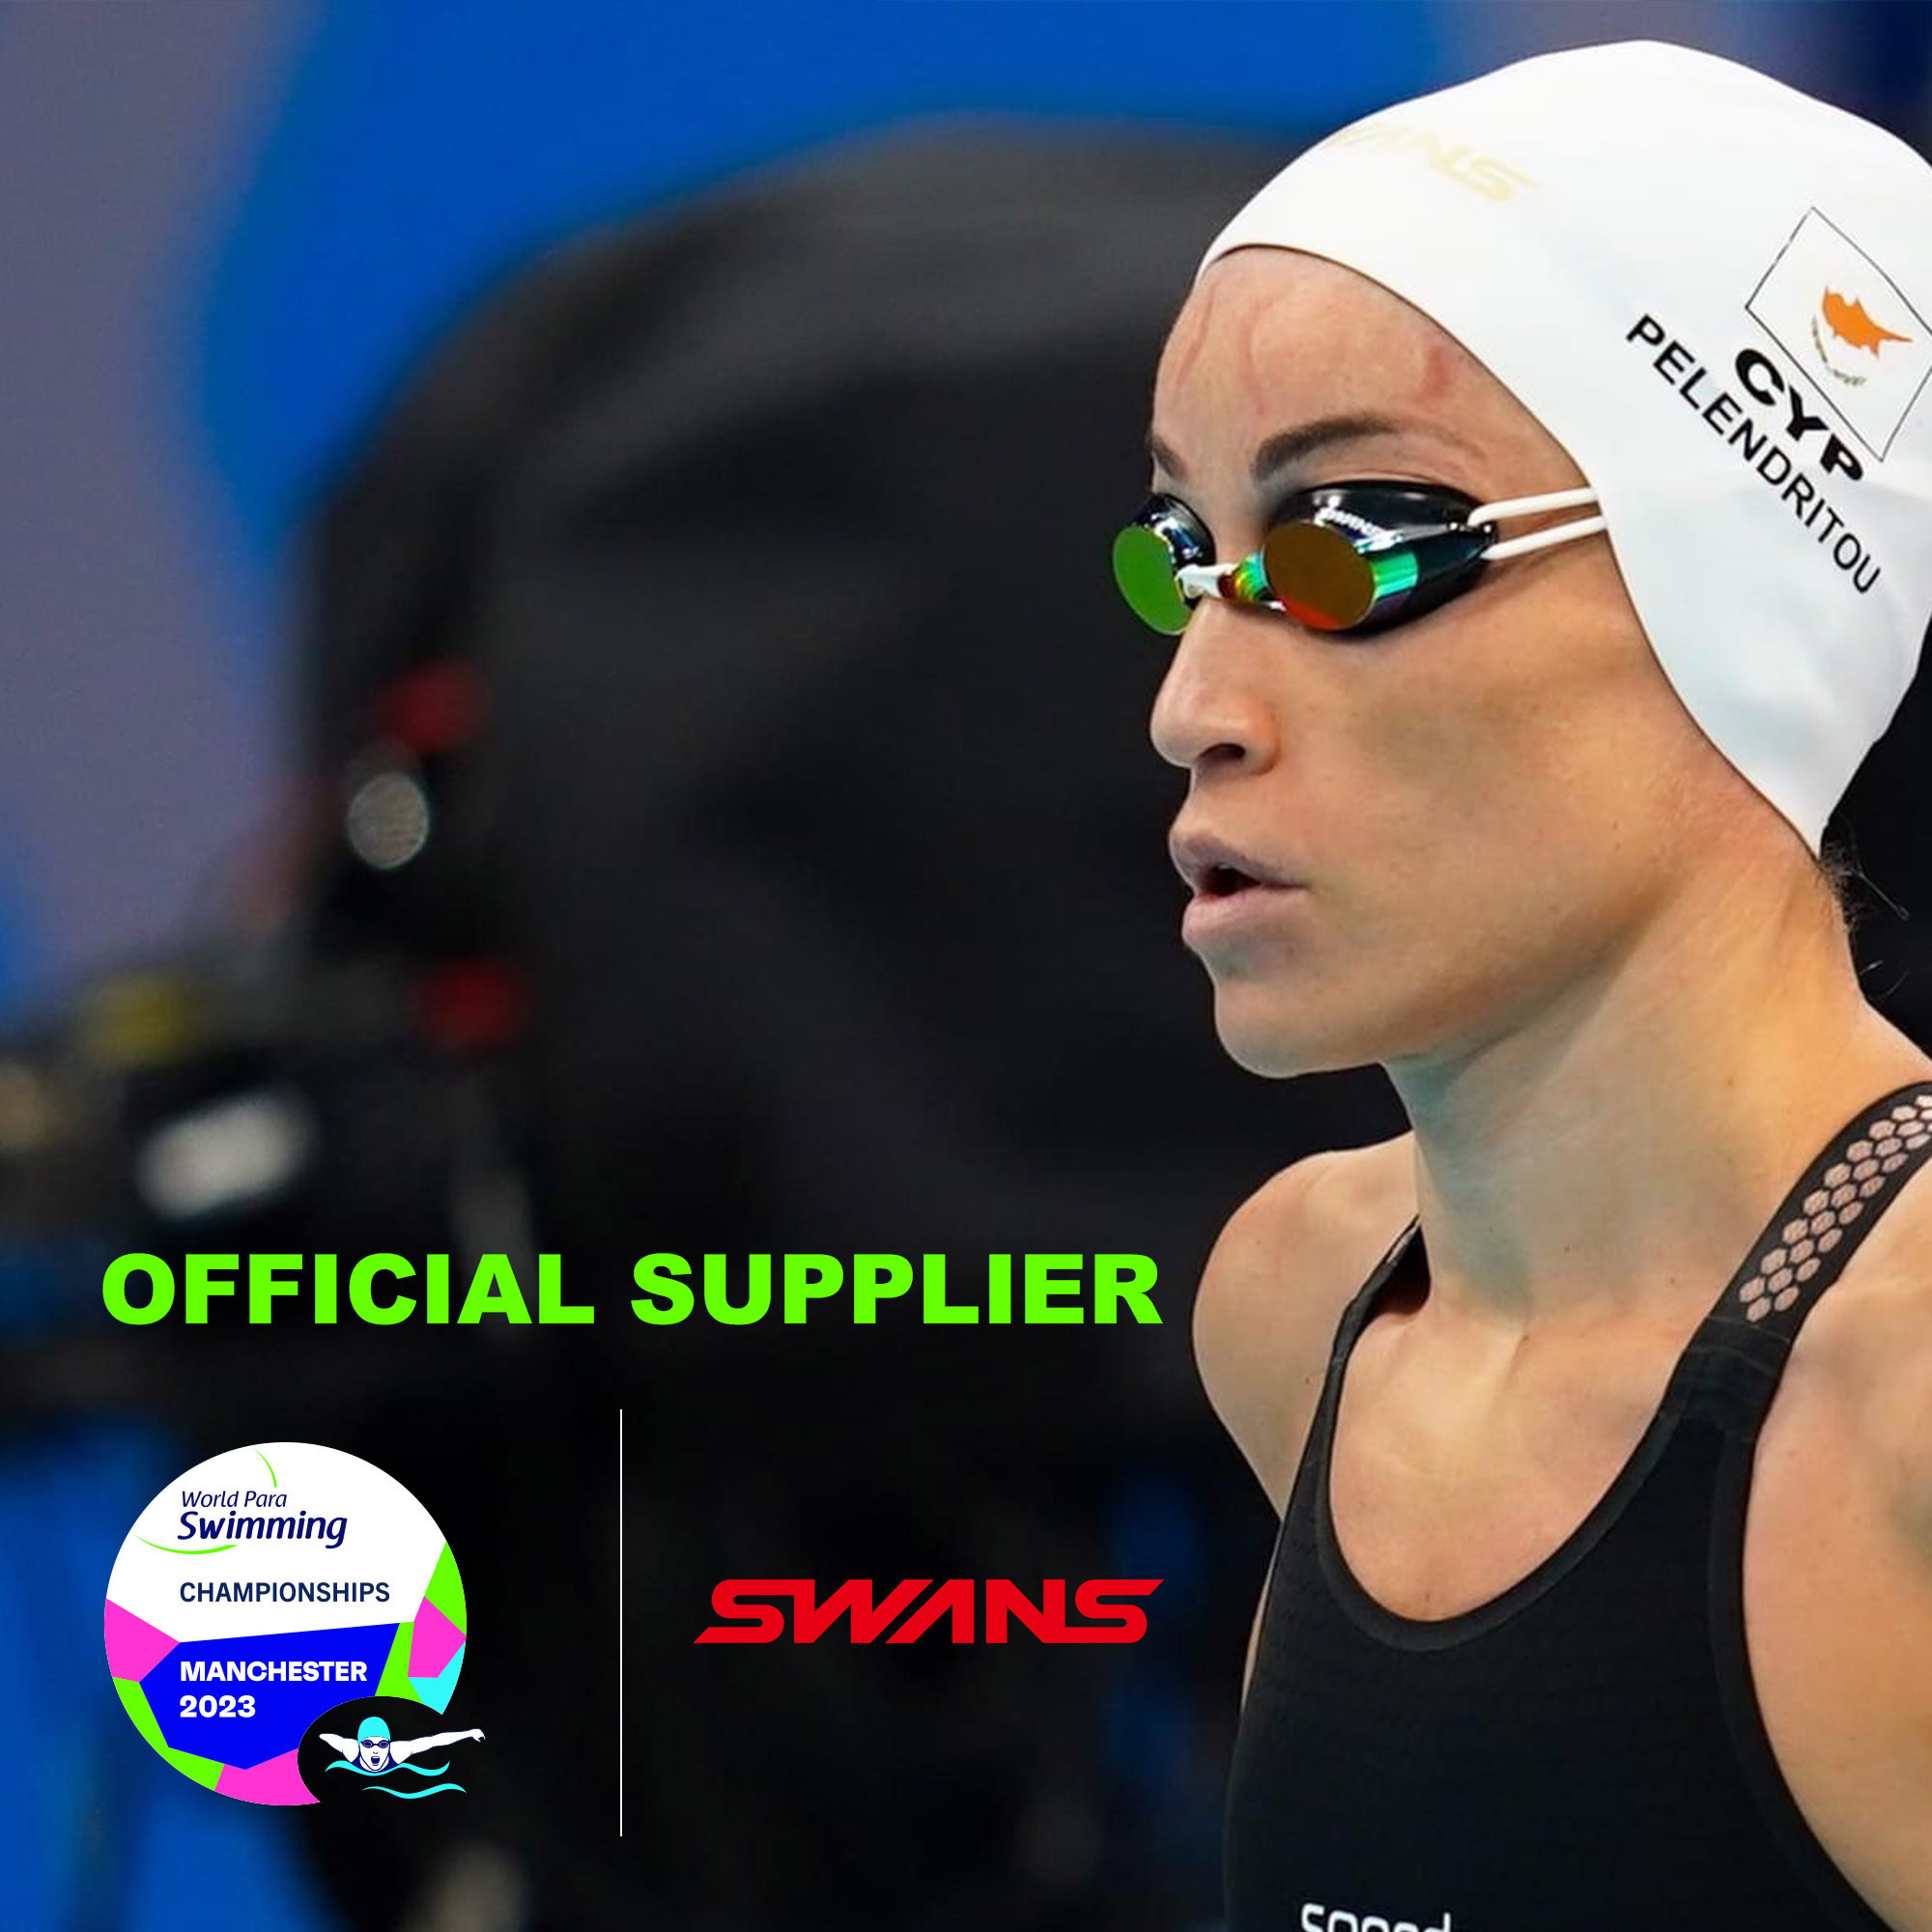 Japanese company Swans has been announced as an official supplier for this year's Para Swimming World Championships in Manchester ©World Para Swimming